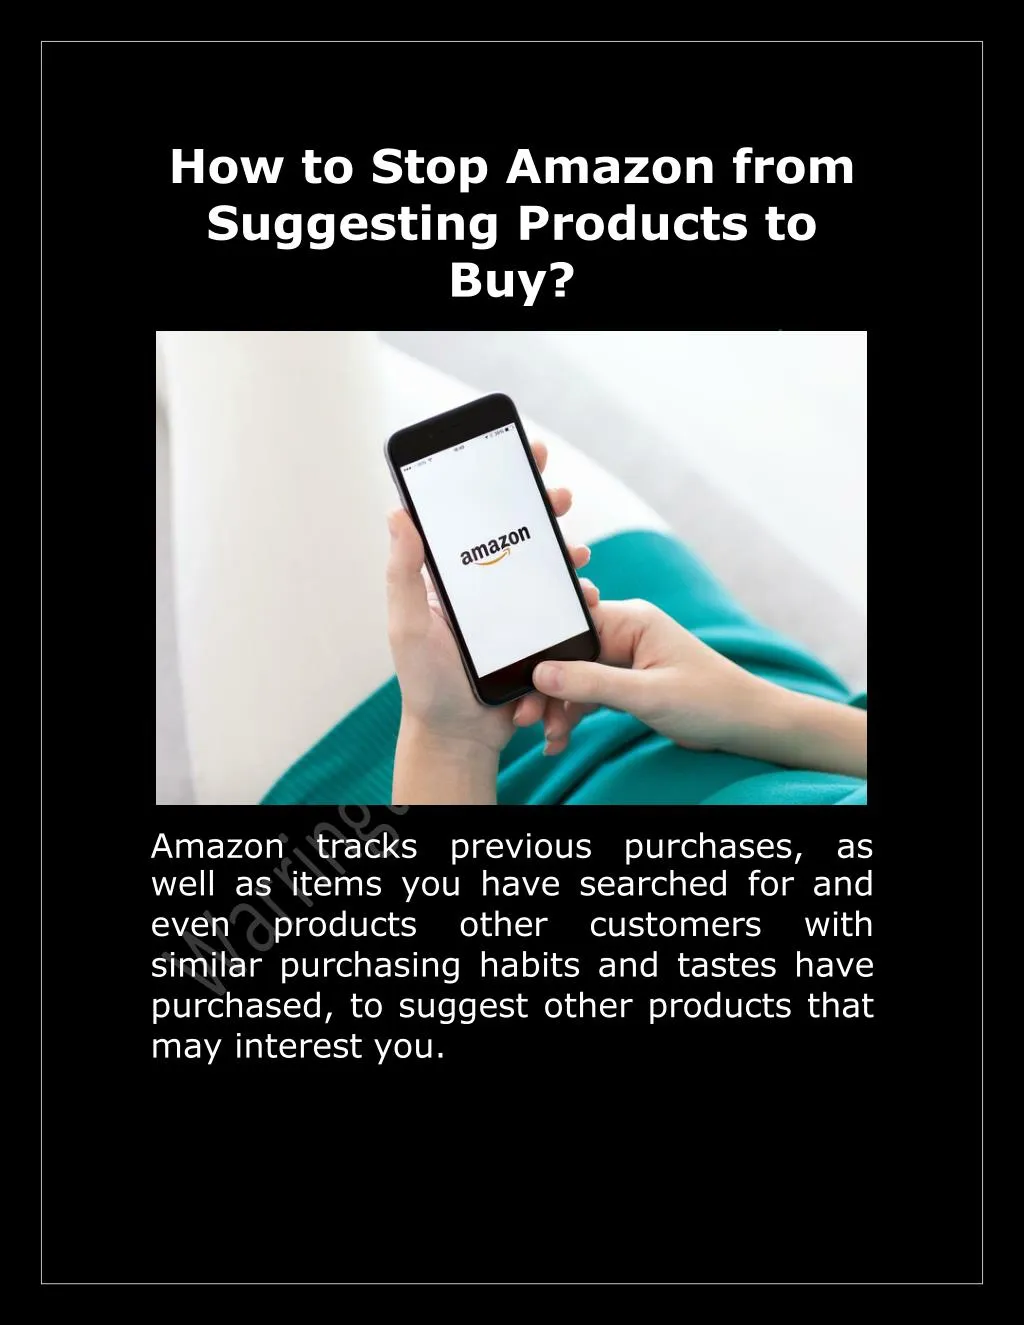 how to stop amazon from suggesting products to buy